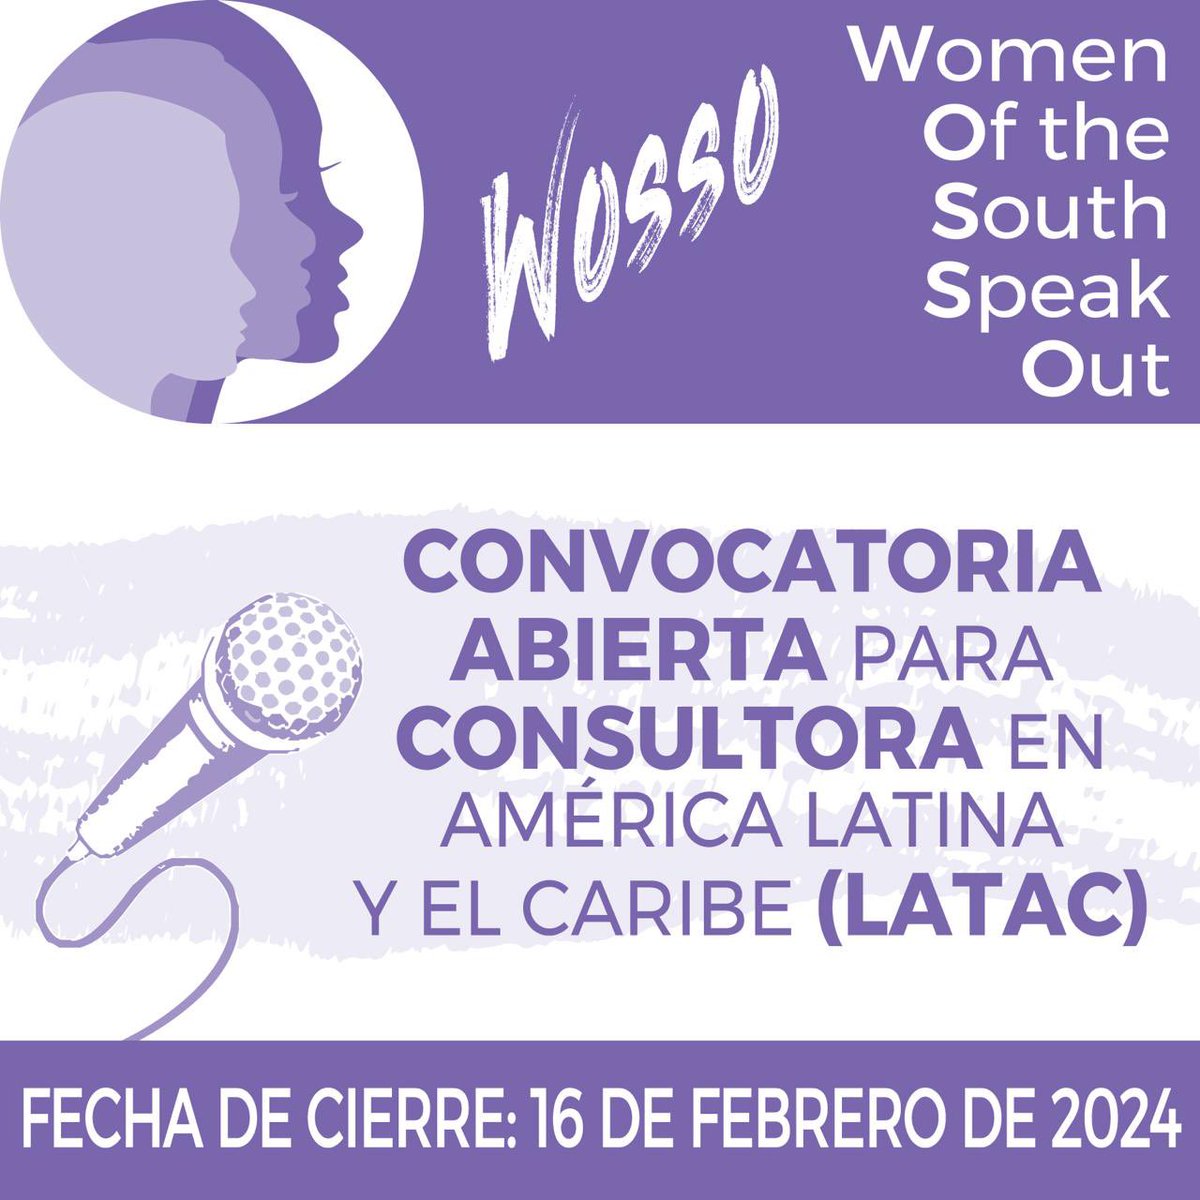 #WOSSO seeks the expertise of a Latin America and the Caribbean (LATAC) expert to undertake a 15-20 day consultancy on enhancing meaningful engagement with LATAC as part of its exciting new project. Click the link for more info wosso.org/2024/02/05/cal…